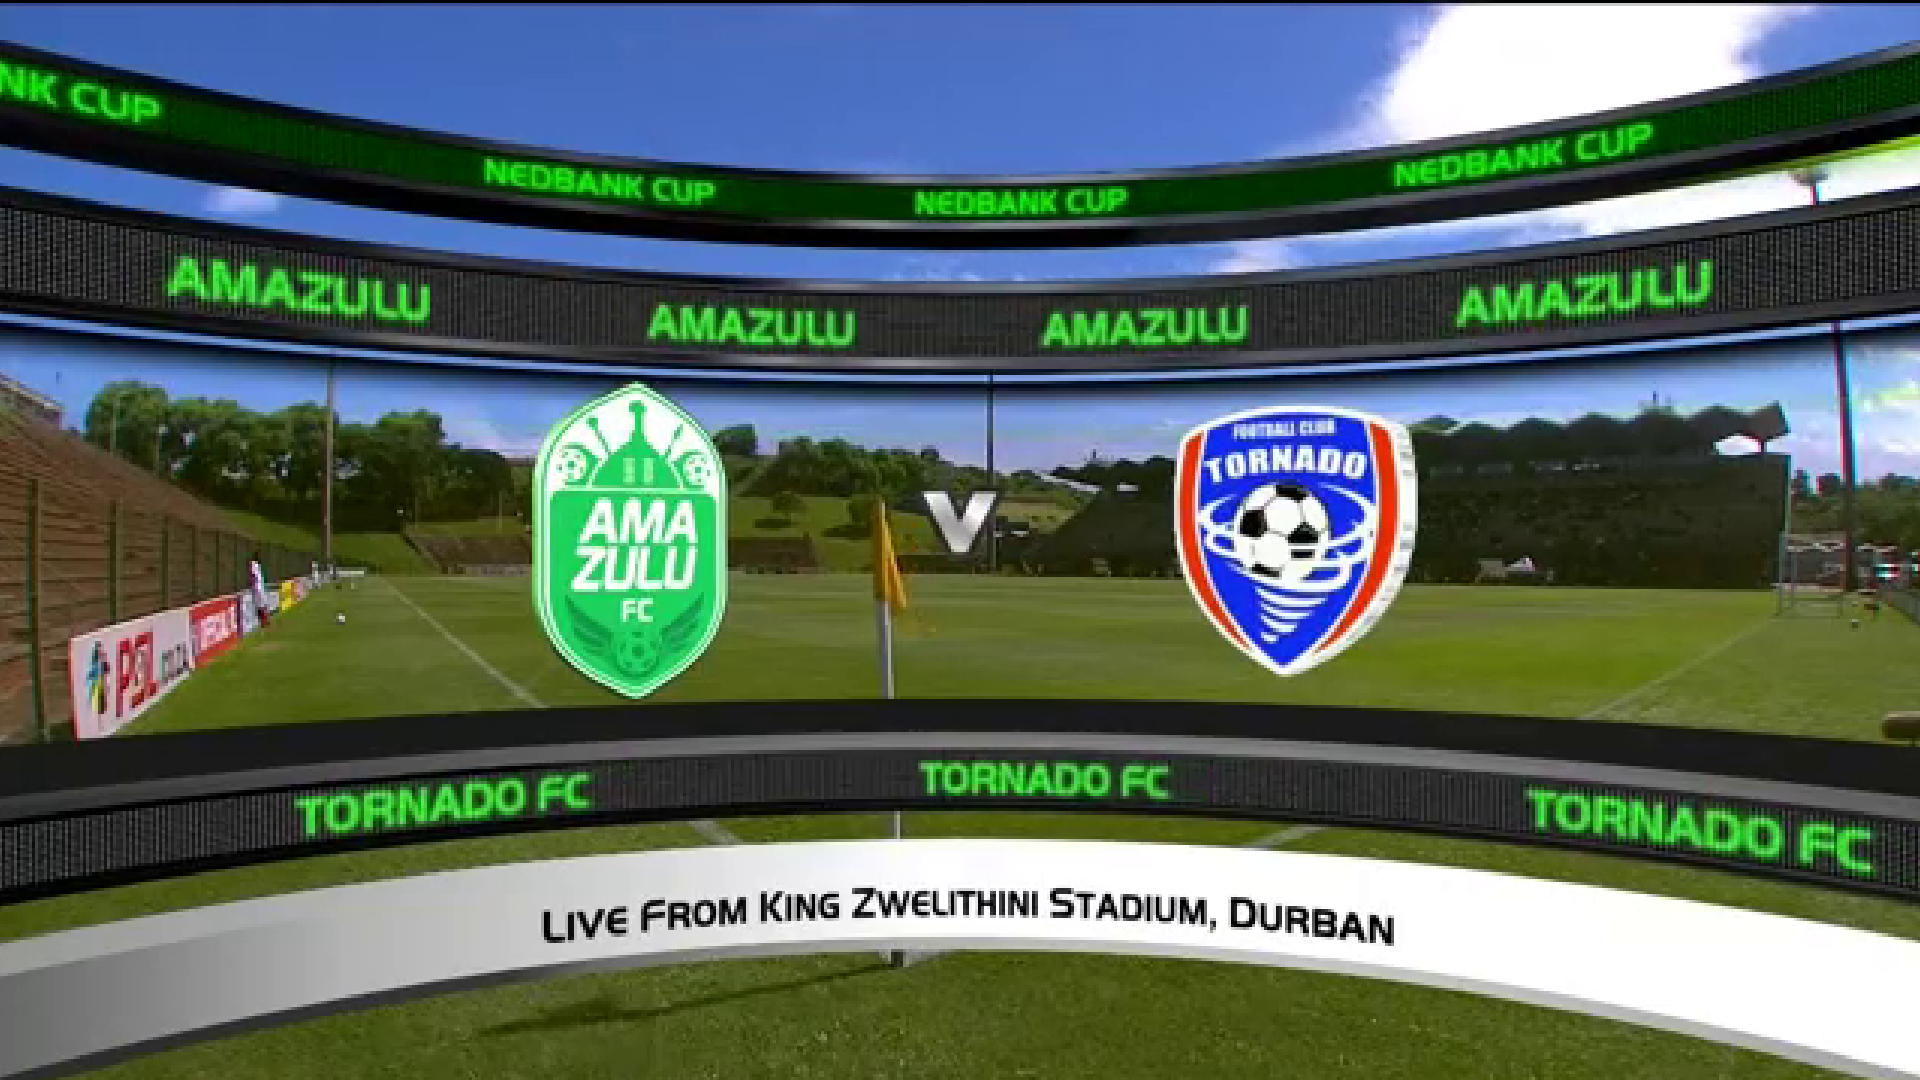 Nedbank Cup | Round of 32 | AmaZulu FC v Tornado FC | Extended highlights